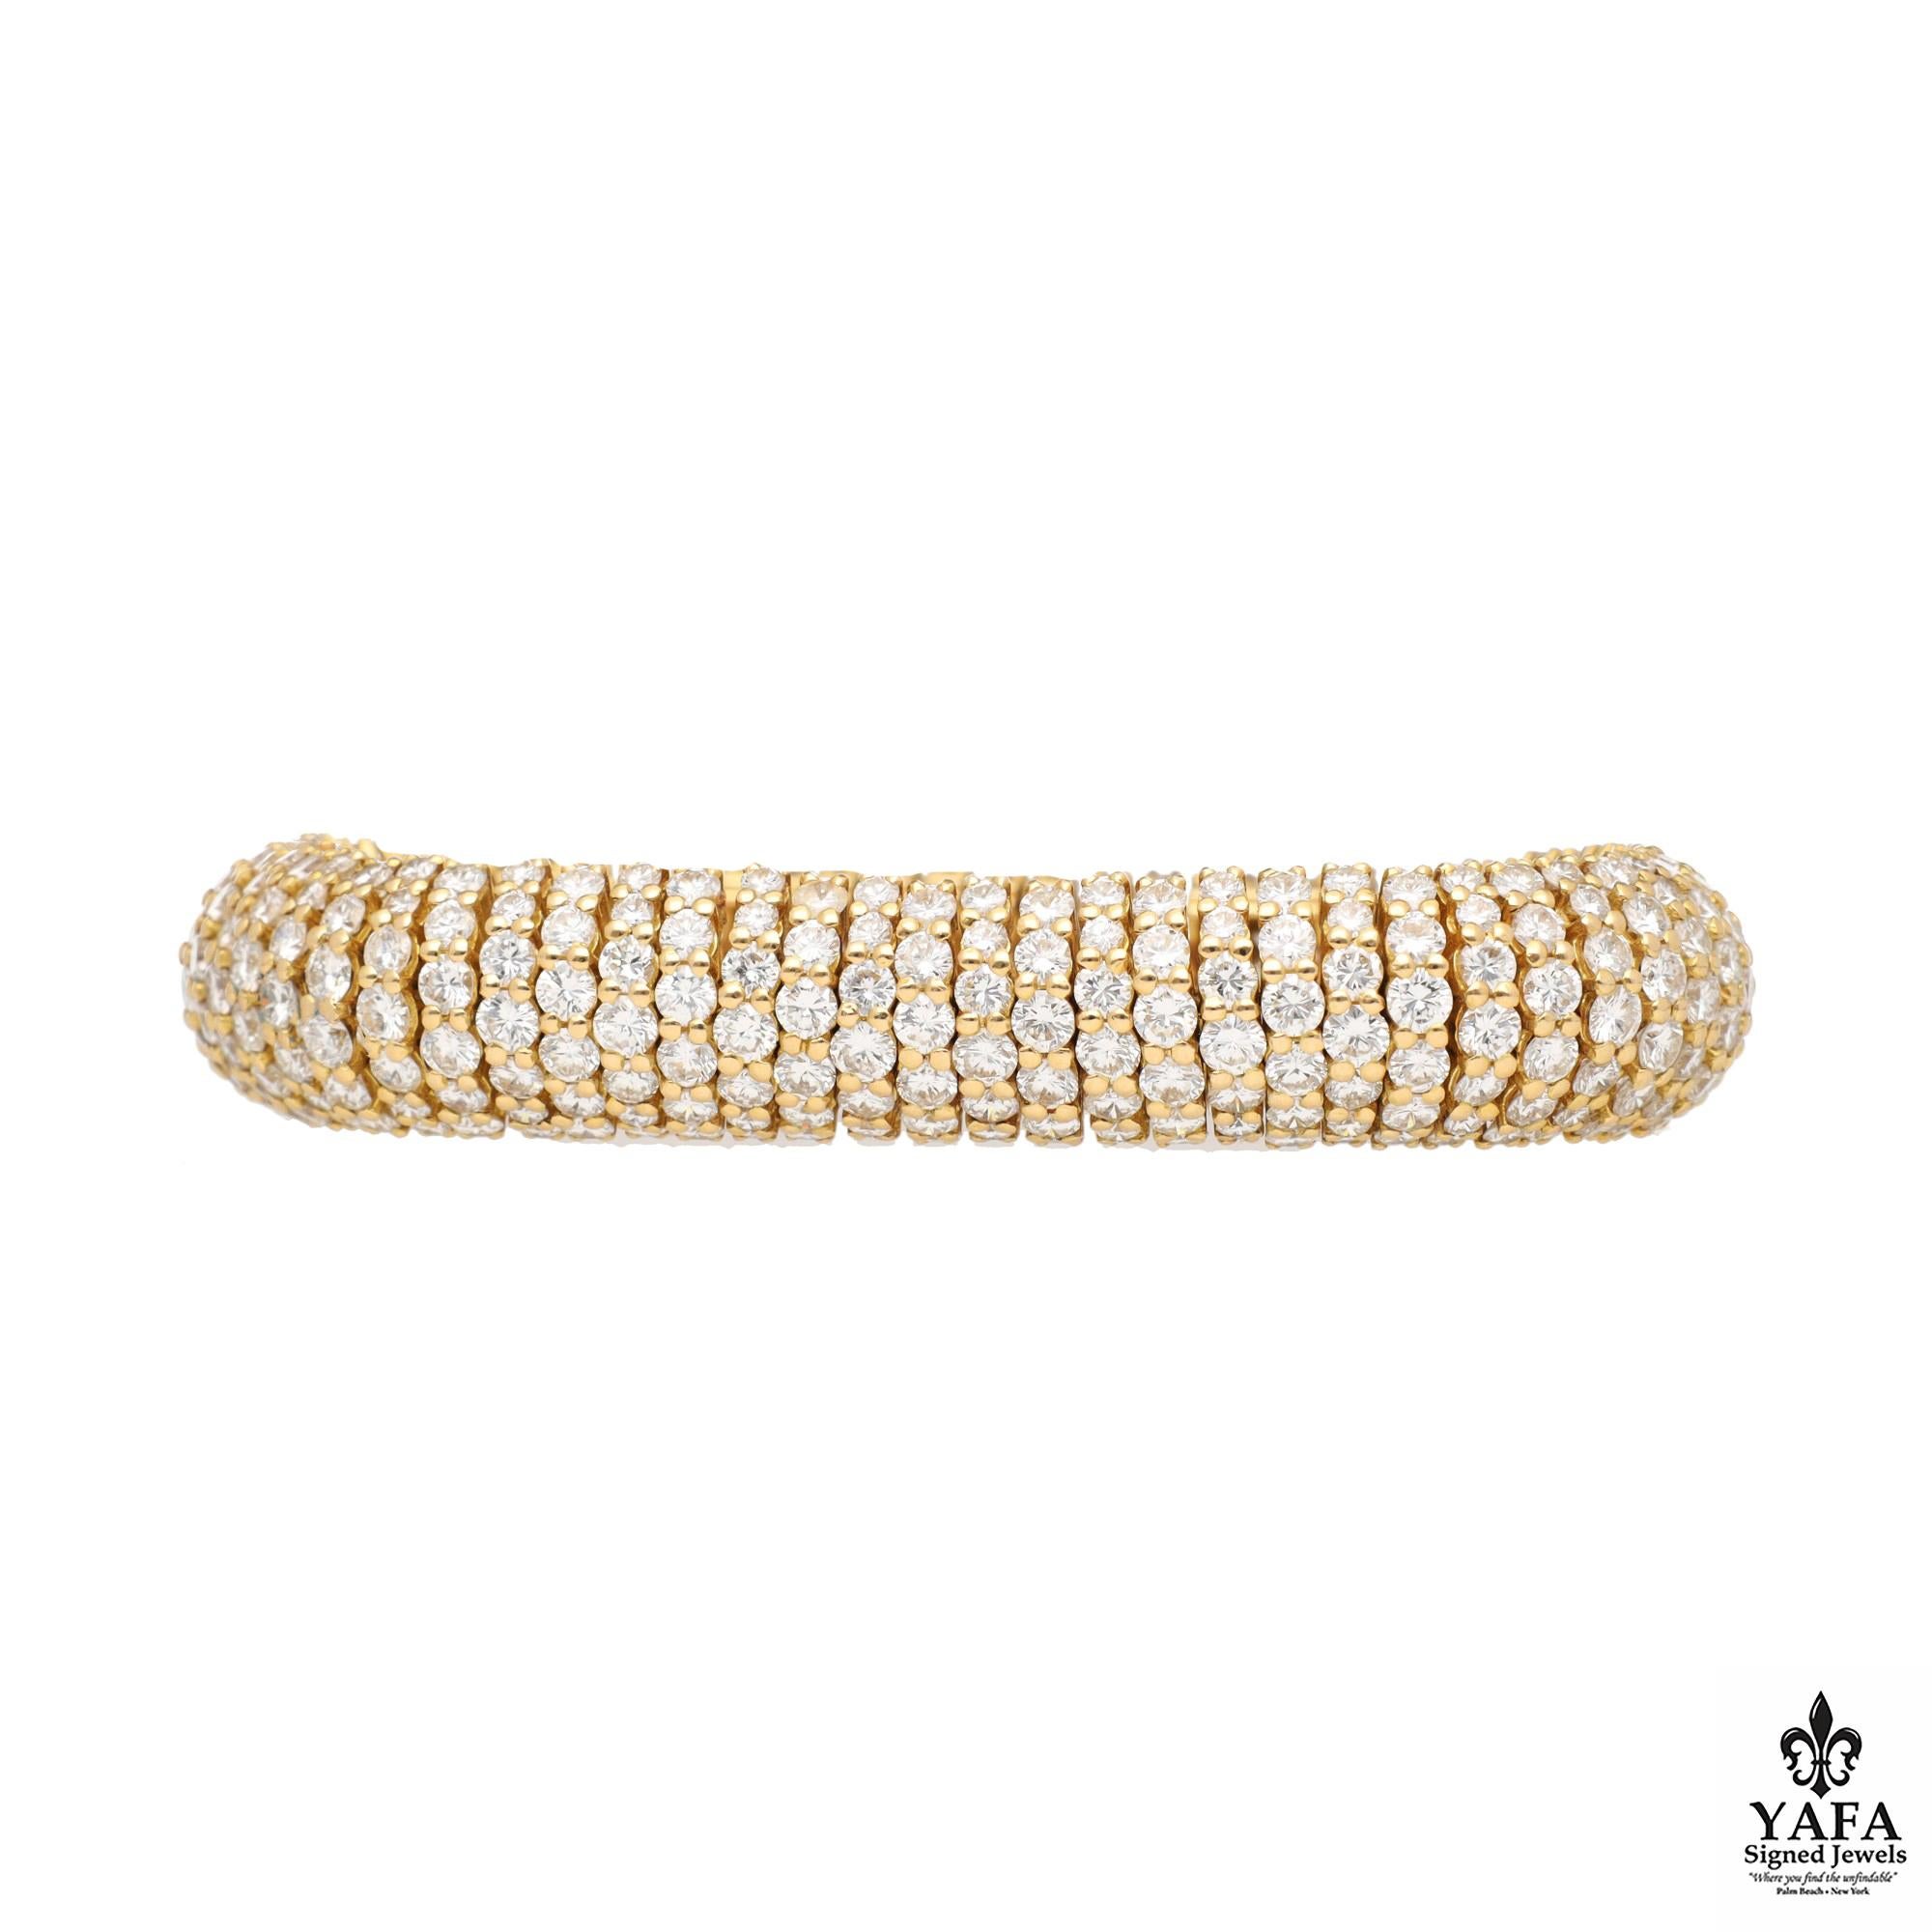 Boucheron 18k yellow gold flexible diamond bracelet. The warm, lustrous gold and brilliant diamonds exudes a timeless appeal, while the subtle detailing demonstrates Boucheron's unwavering commitment to excellence. Composed of multiple rows of